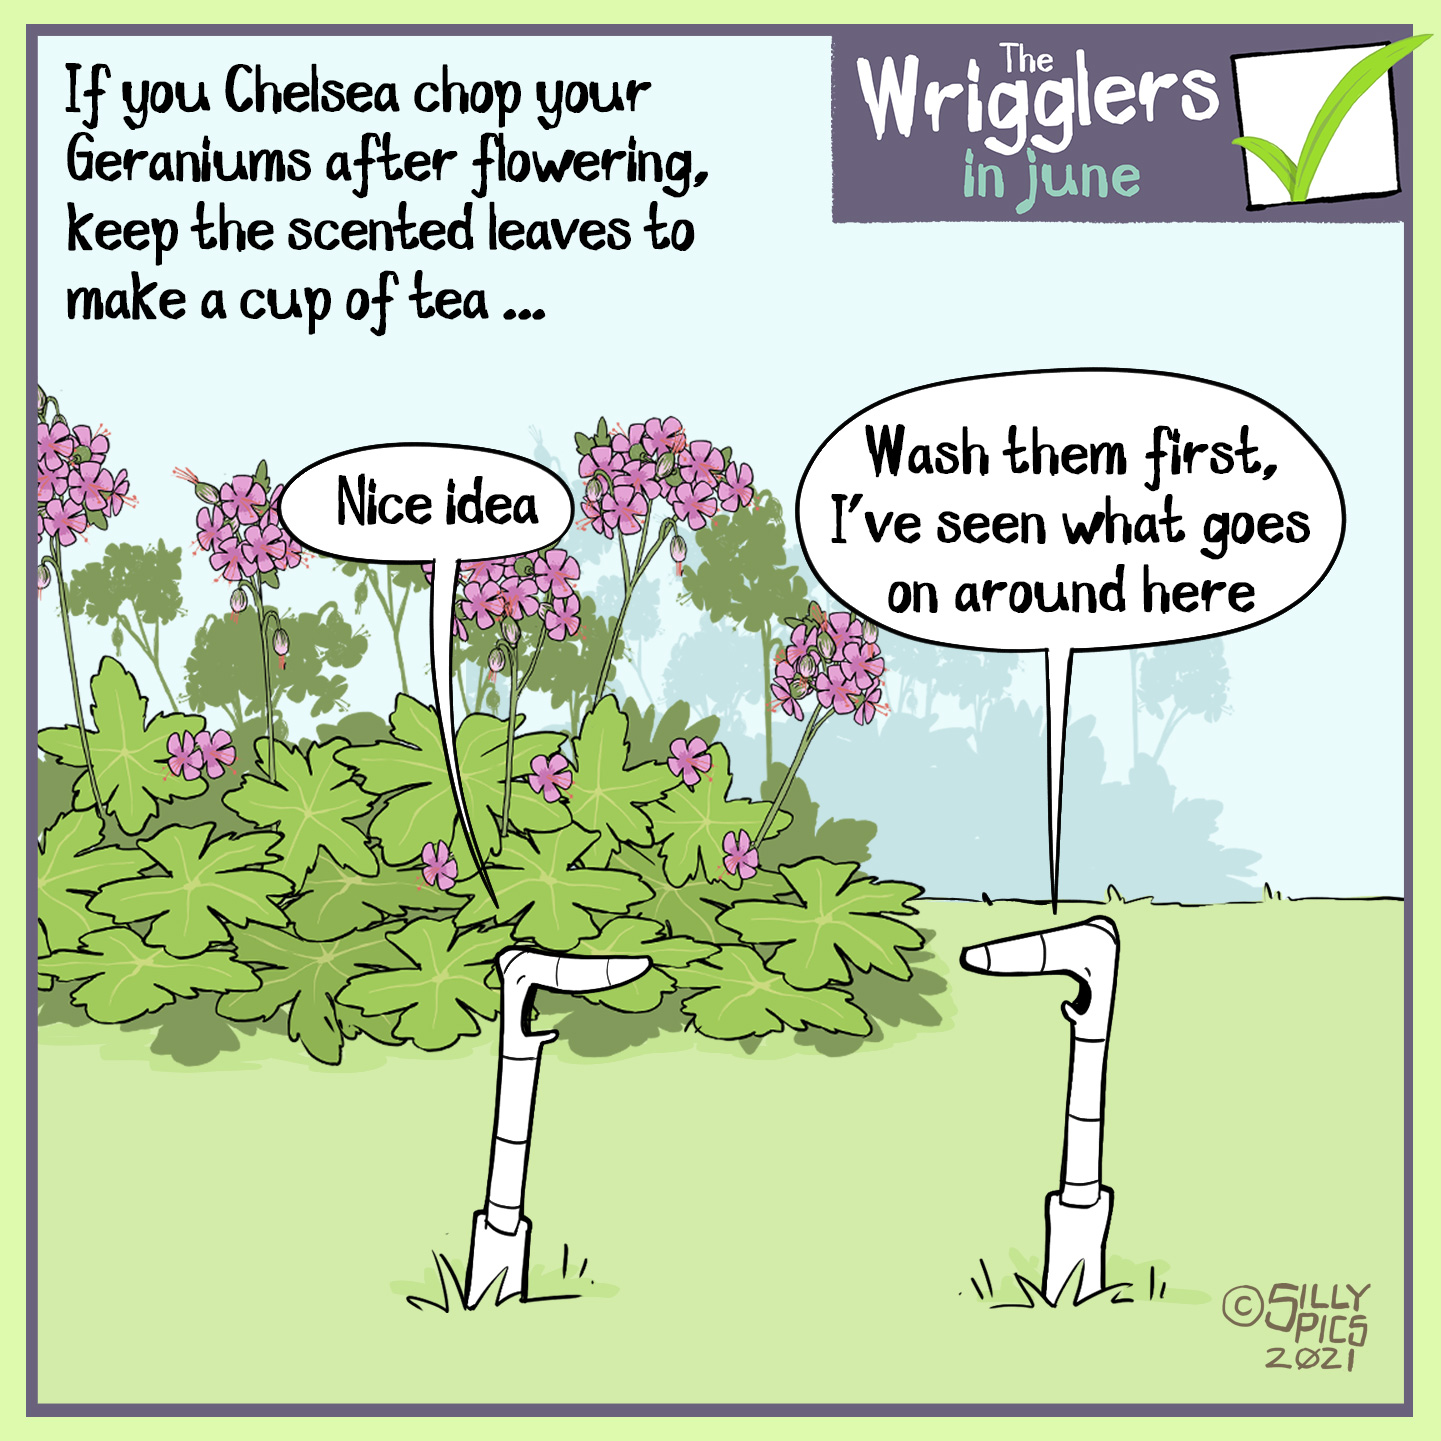 The cartoon reads, If you Chelsea chop your Geraniums after flowering, keep the scented leaves to make a cup of tea The cartoon is of two worms in front of a geranium in flower. One one says, “ Nice idea …” The other work says, “Wash them first, I’ve seen what goes on around here.”